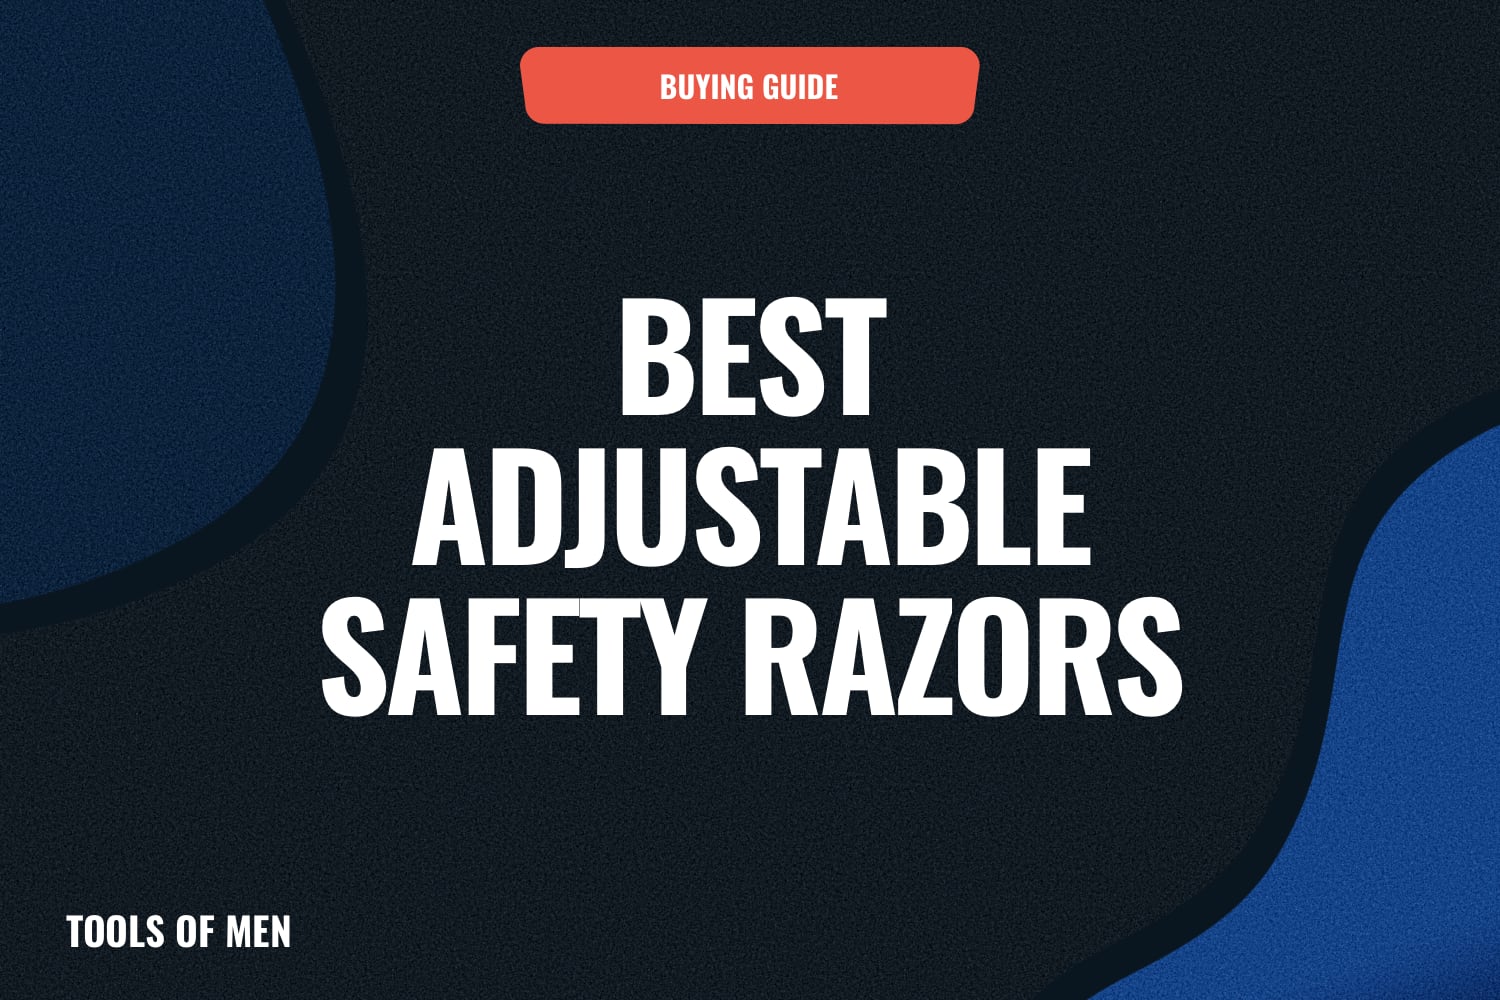 Best adjustable safety razors feature image